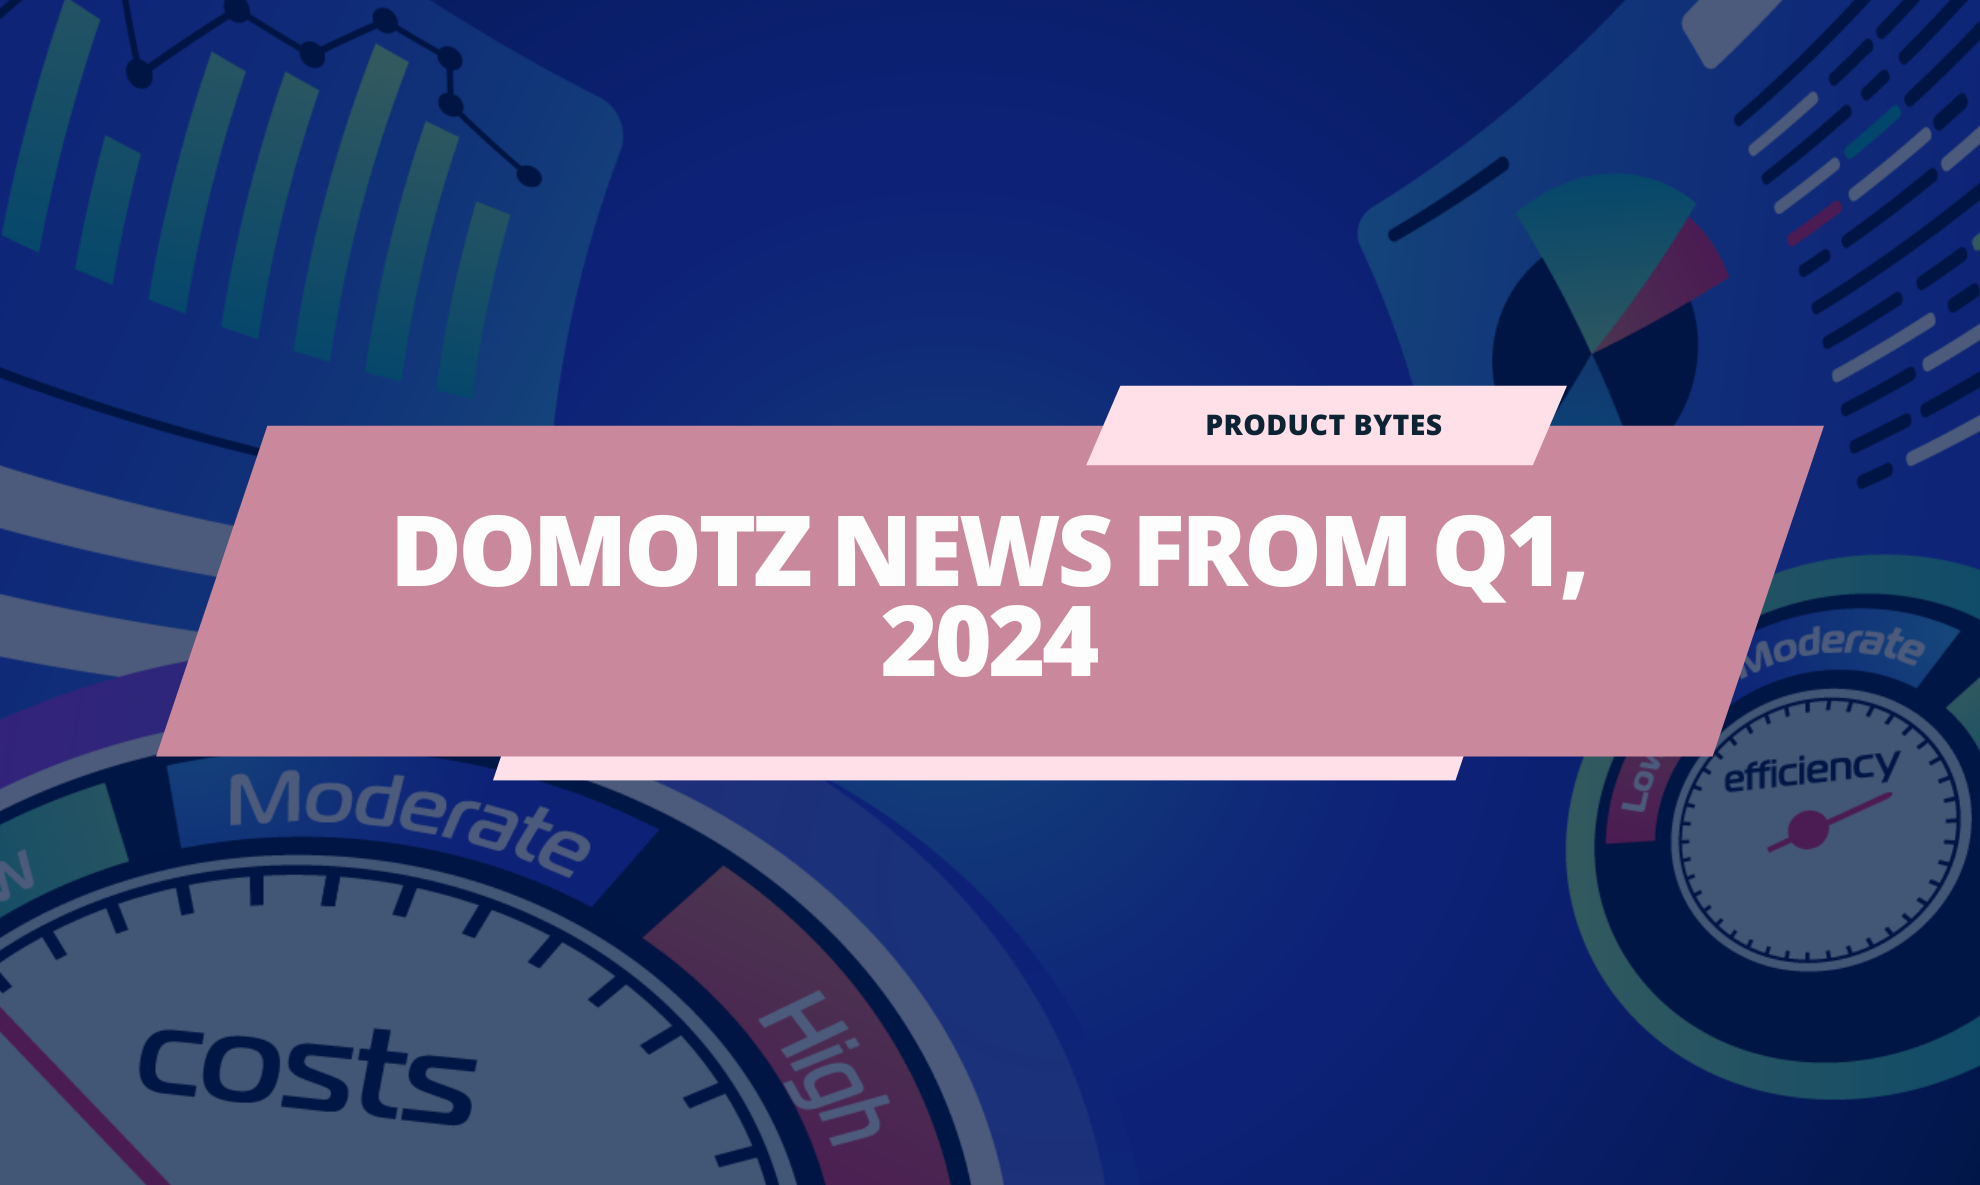 Domotz News From Q1 (January to March) 2024